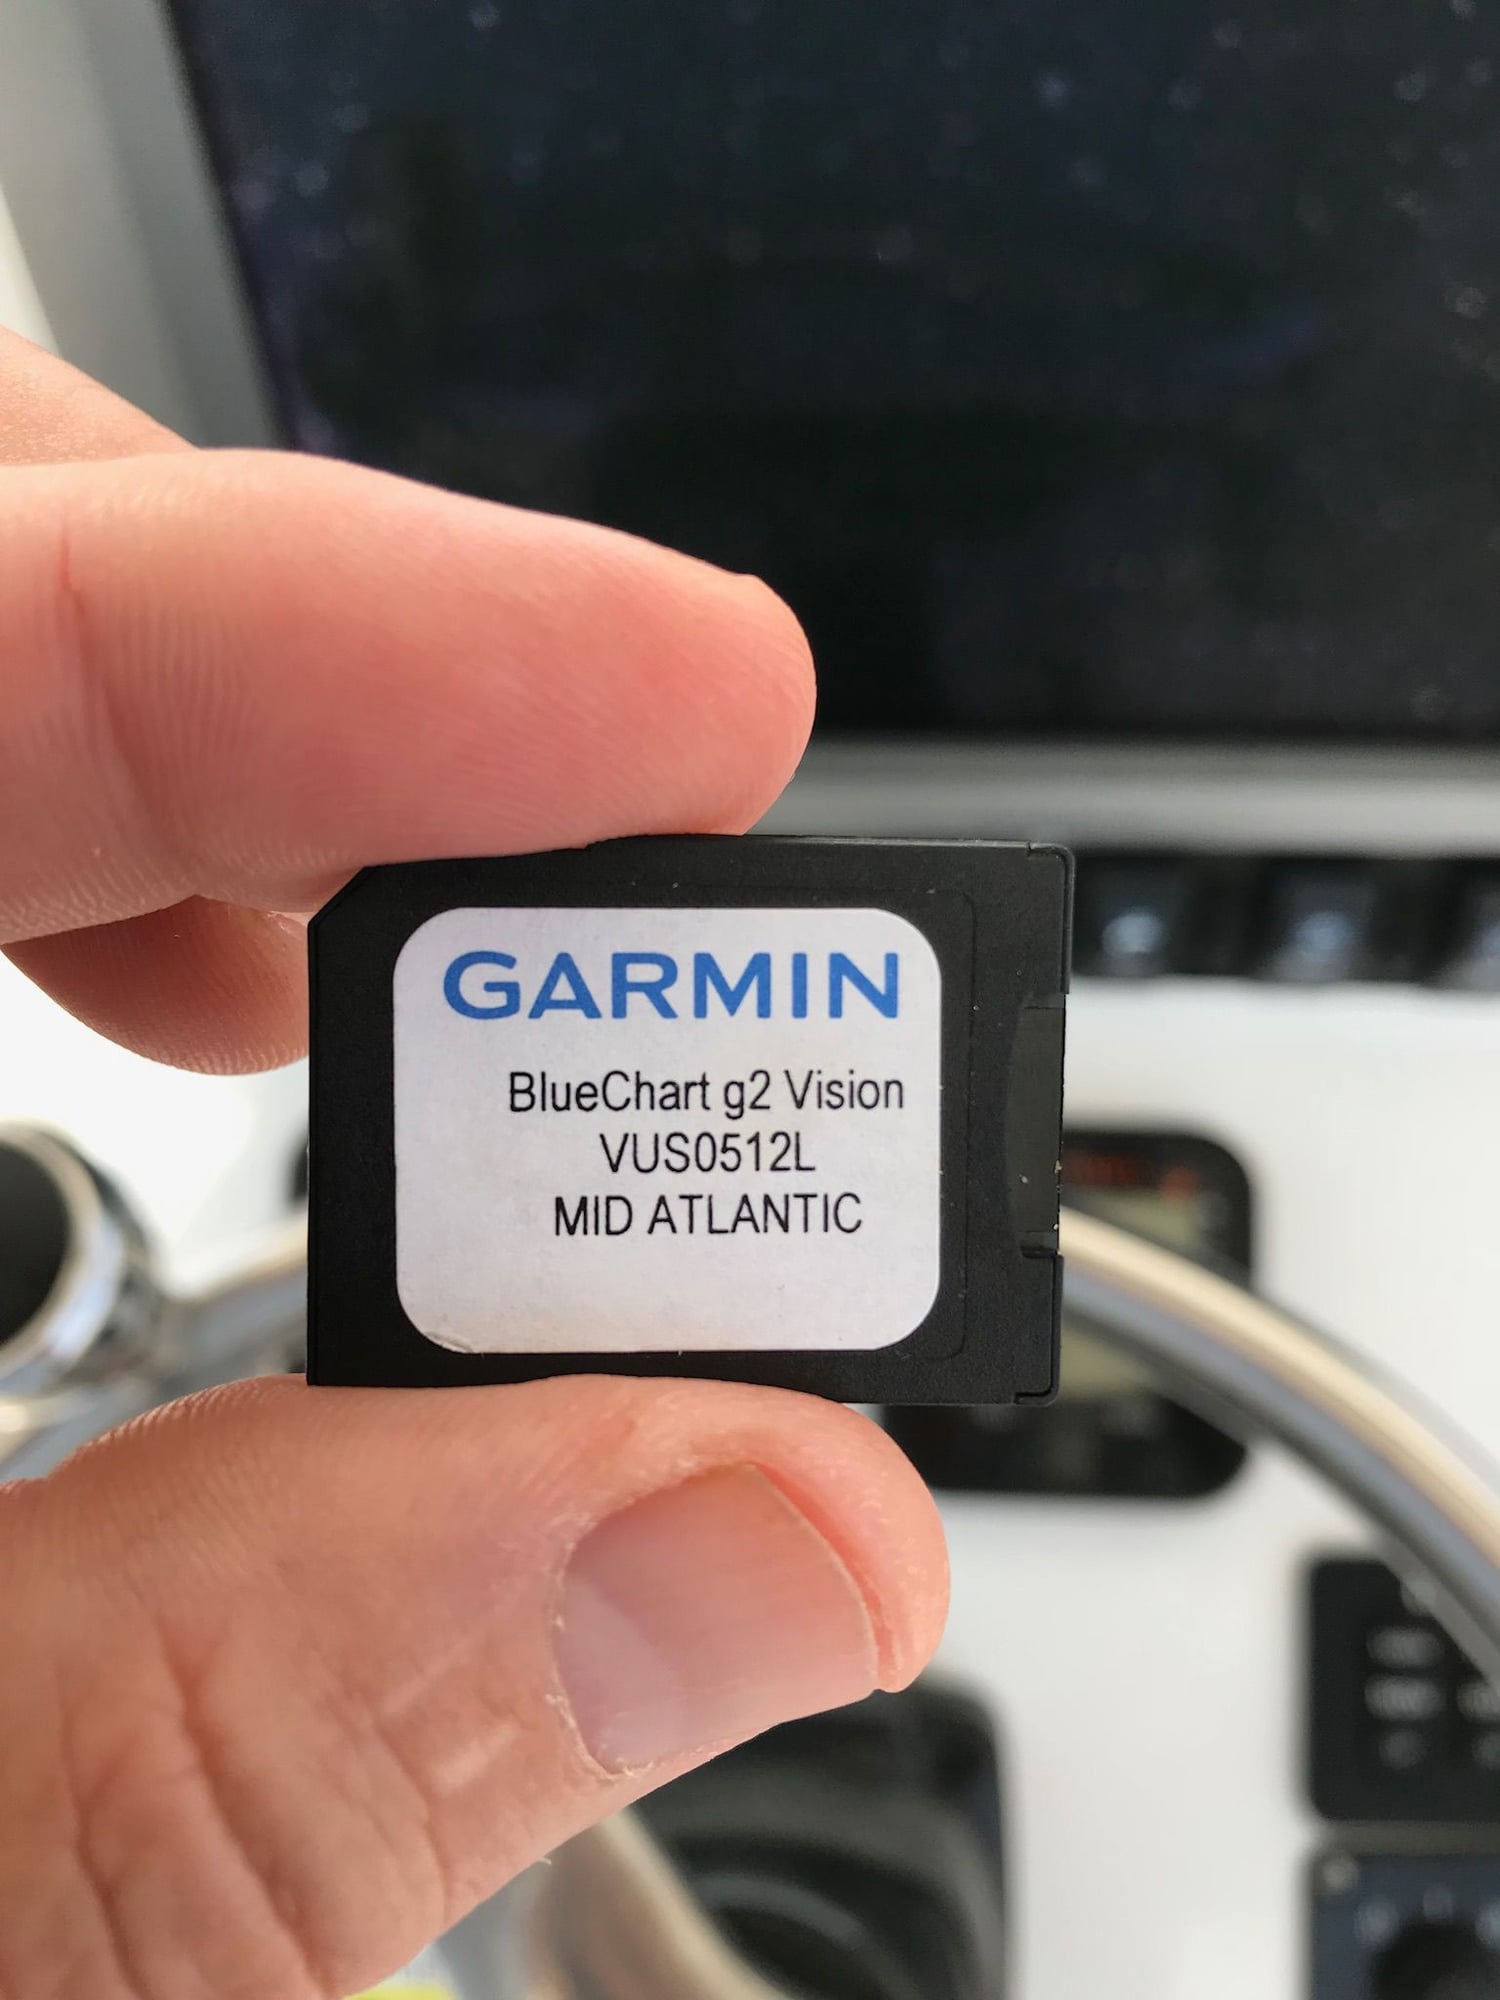 help-with-garmin-g2-vision-card-4212-the-hull-truth-boating-and